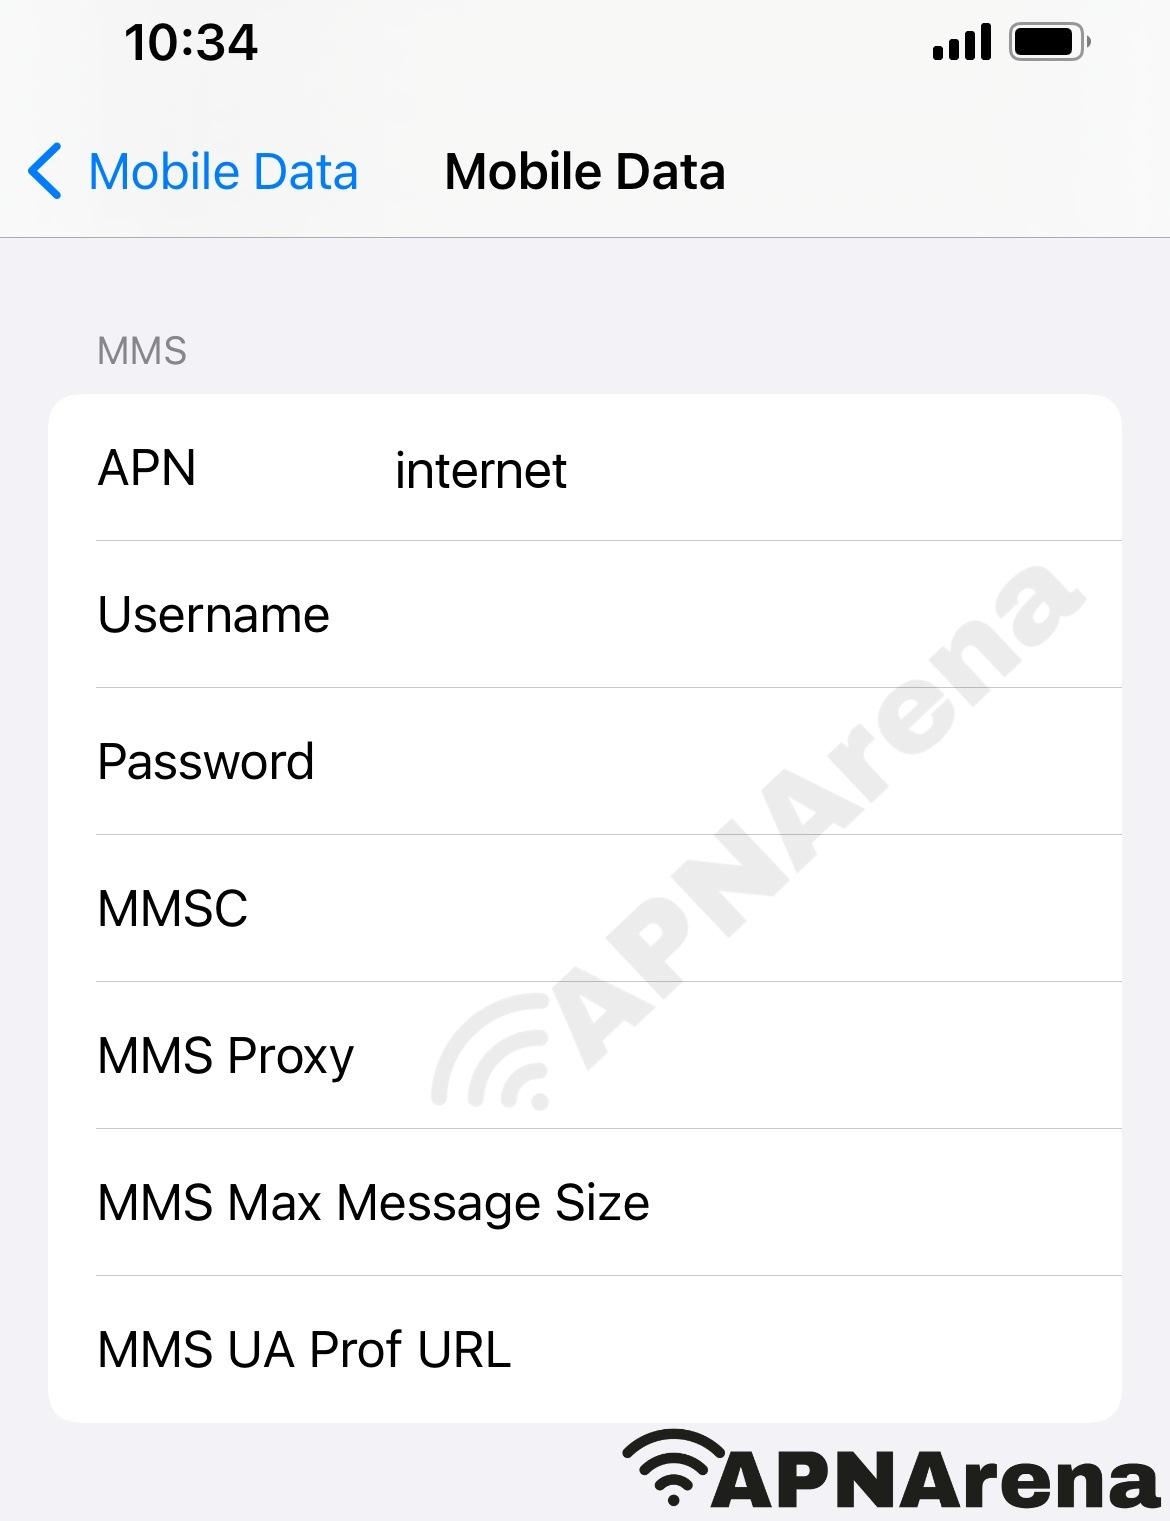 MTEL MMS Settings for iPhone